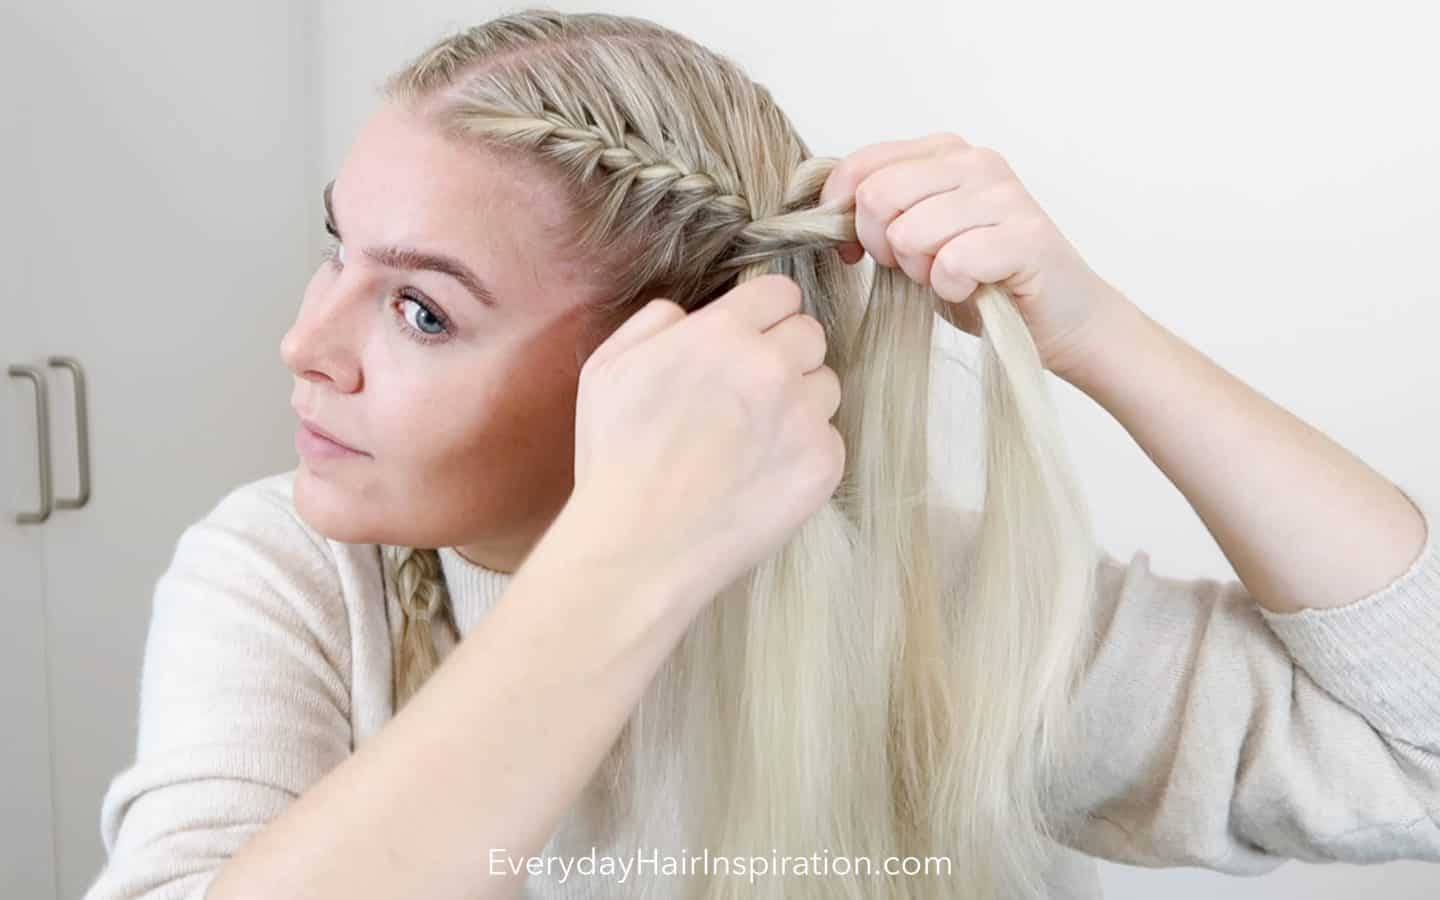 From French To Box: Variety Of Two Braids Styles | Hairdo for long hair,  Hair styles, Long hair styles